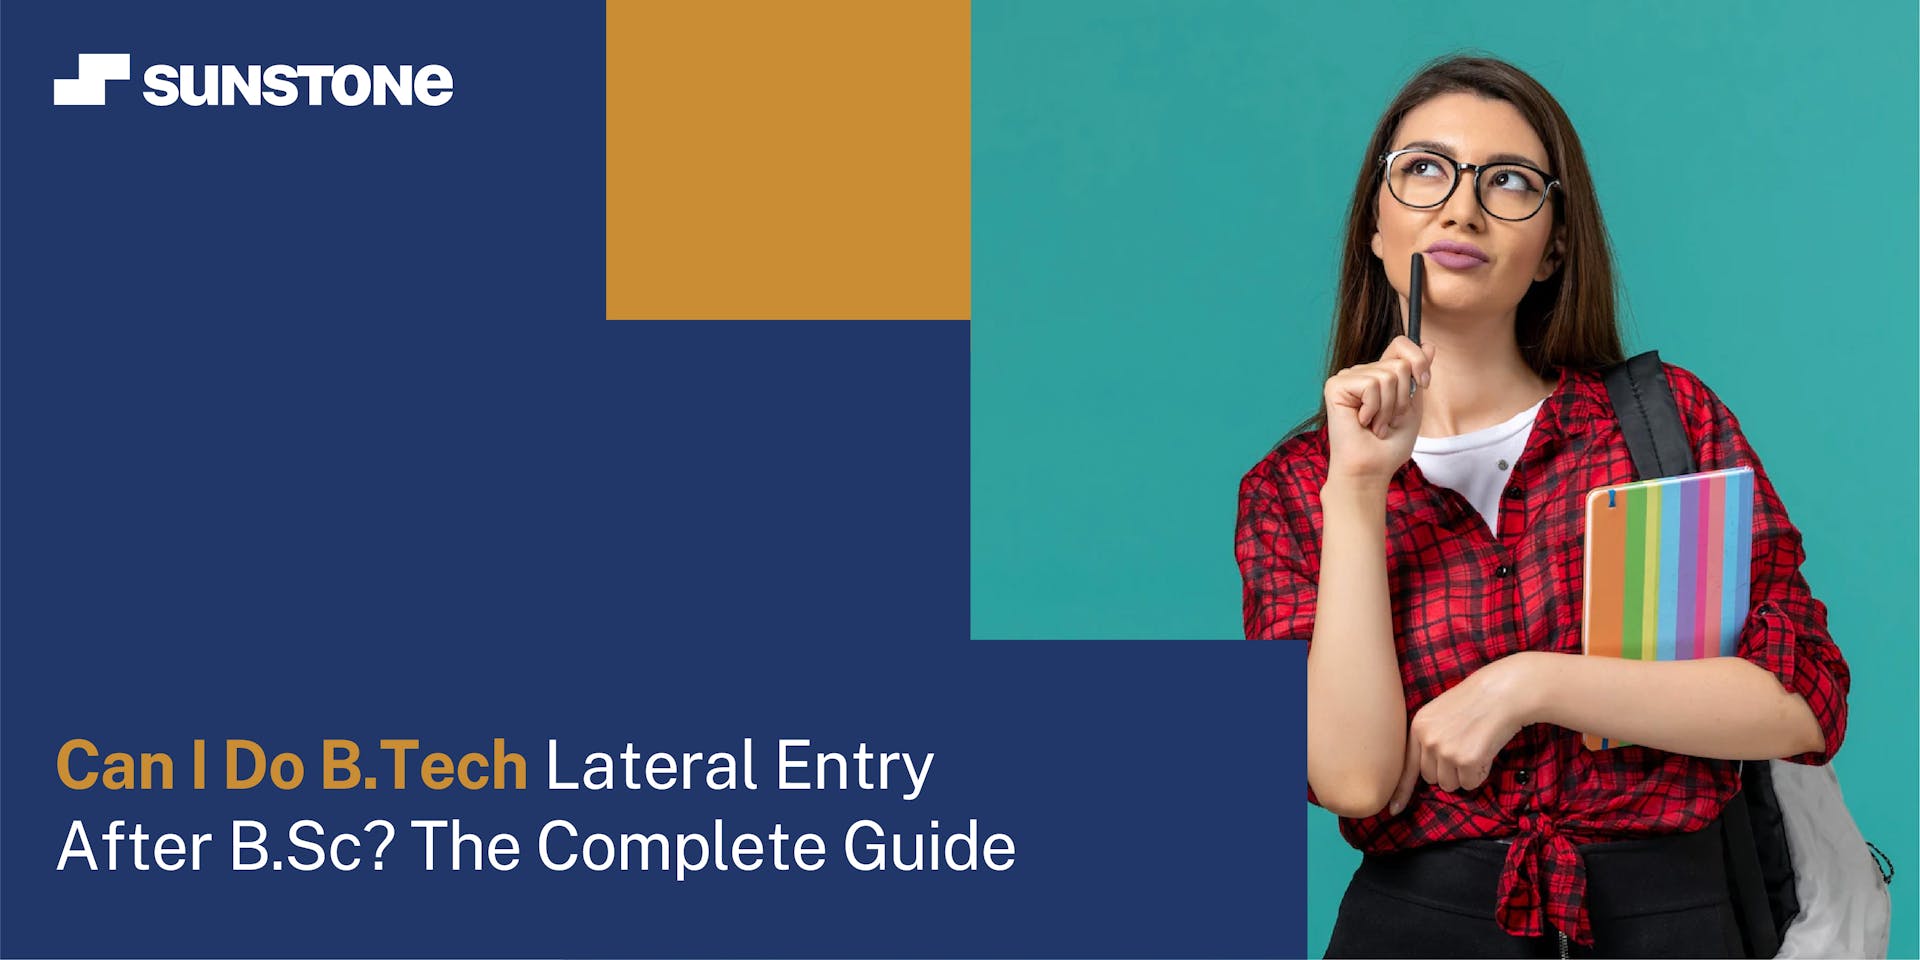 Can I Do B.Tech Lateral Entry After B.Sc? The Complete Guide